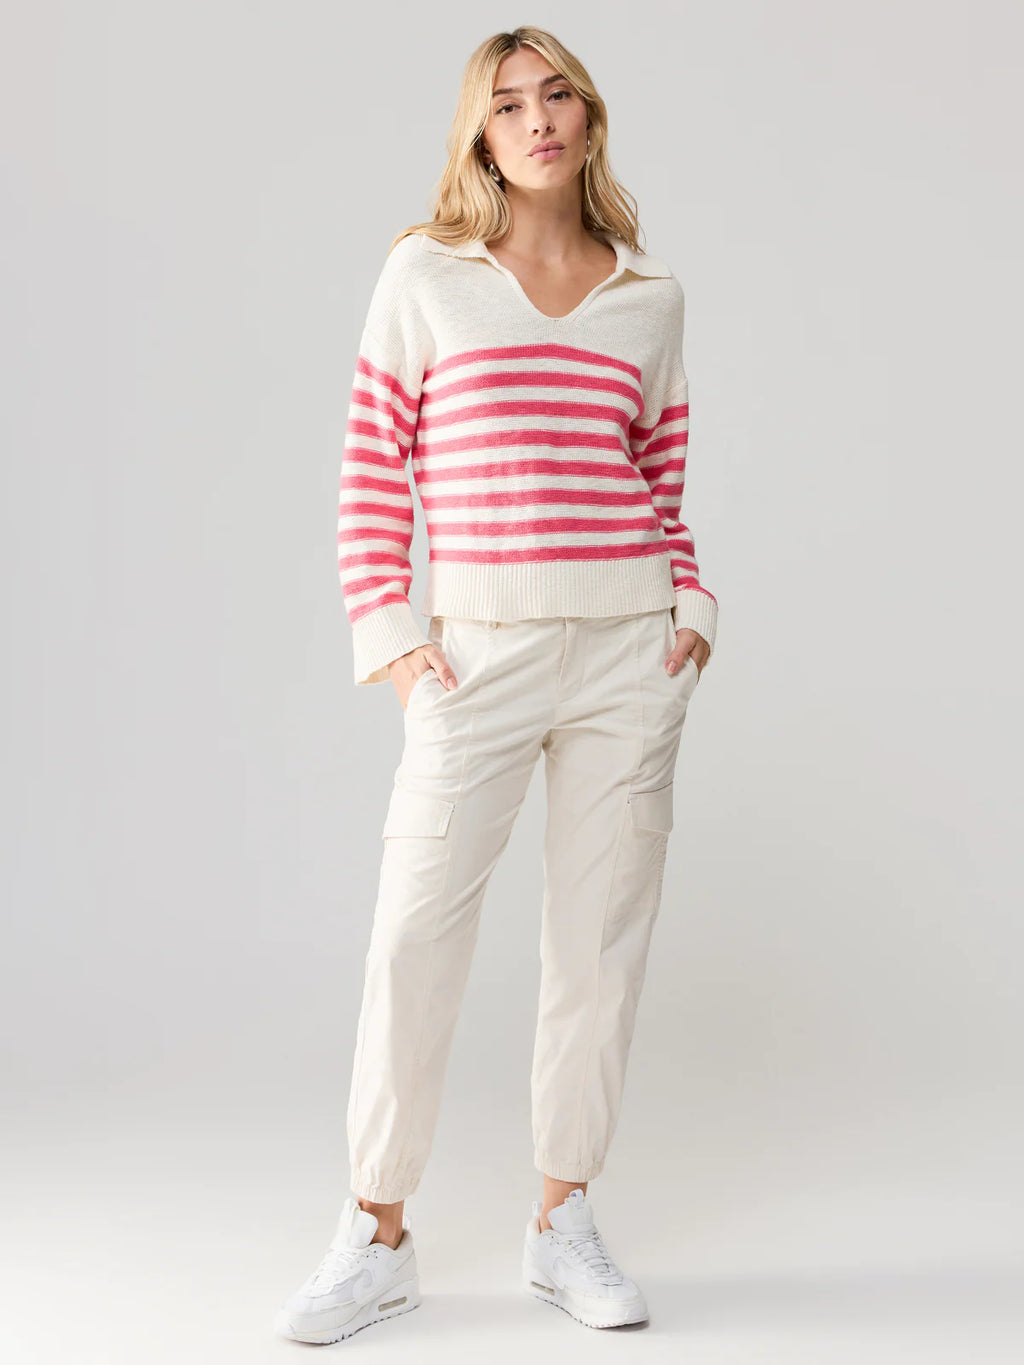 Perfect Timing Sweater- Flushed Stripe